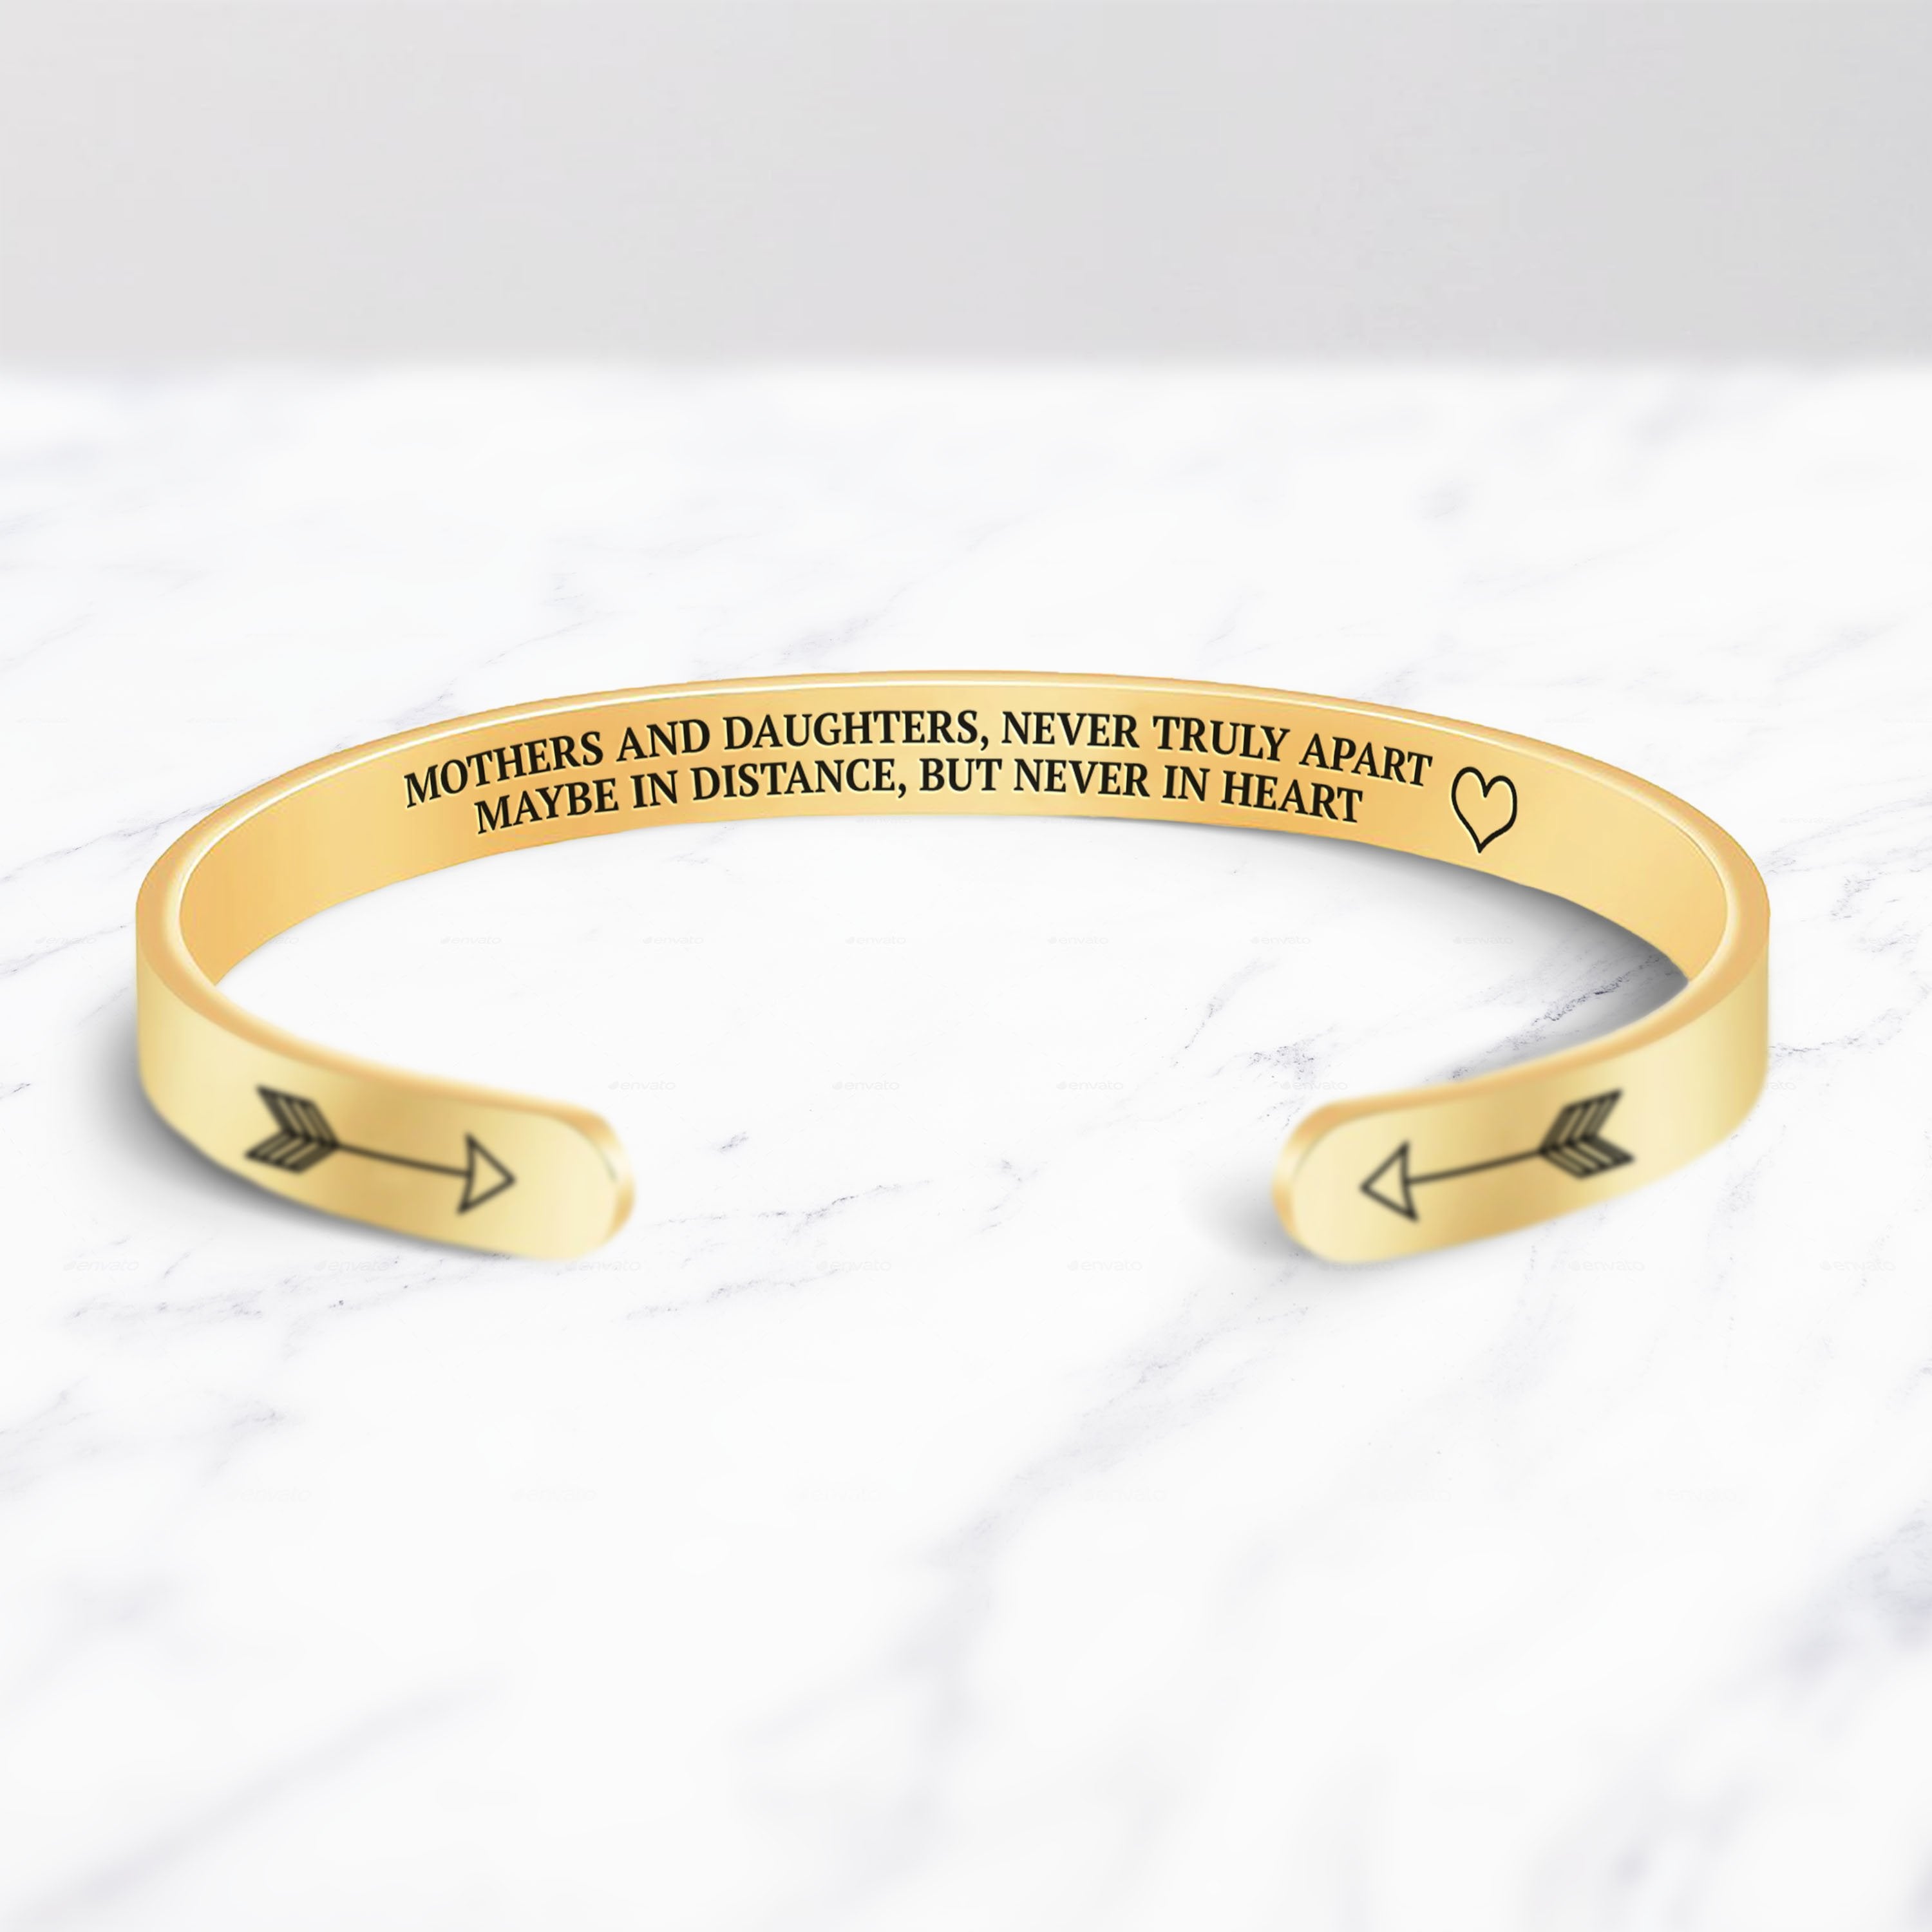 Mothers and Daughters Never Truly Part Cuff Bracelet bracelet with gold plating on a marble background